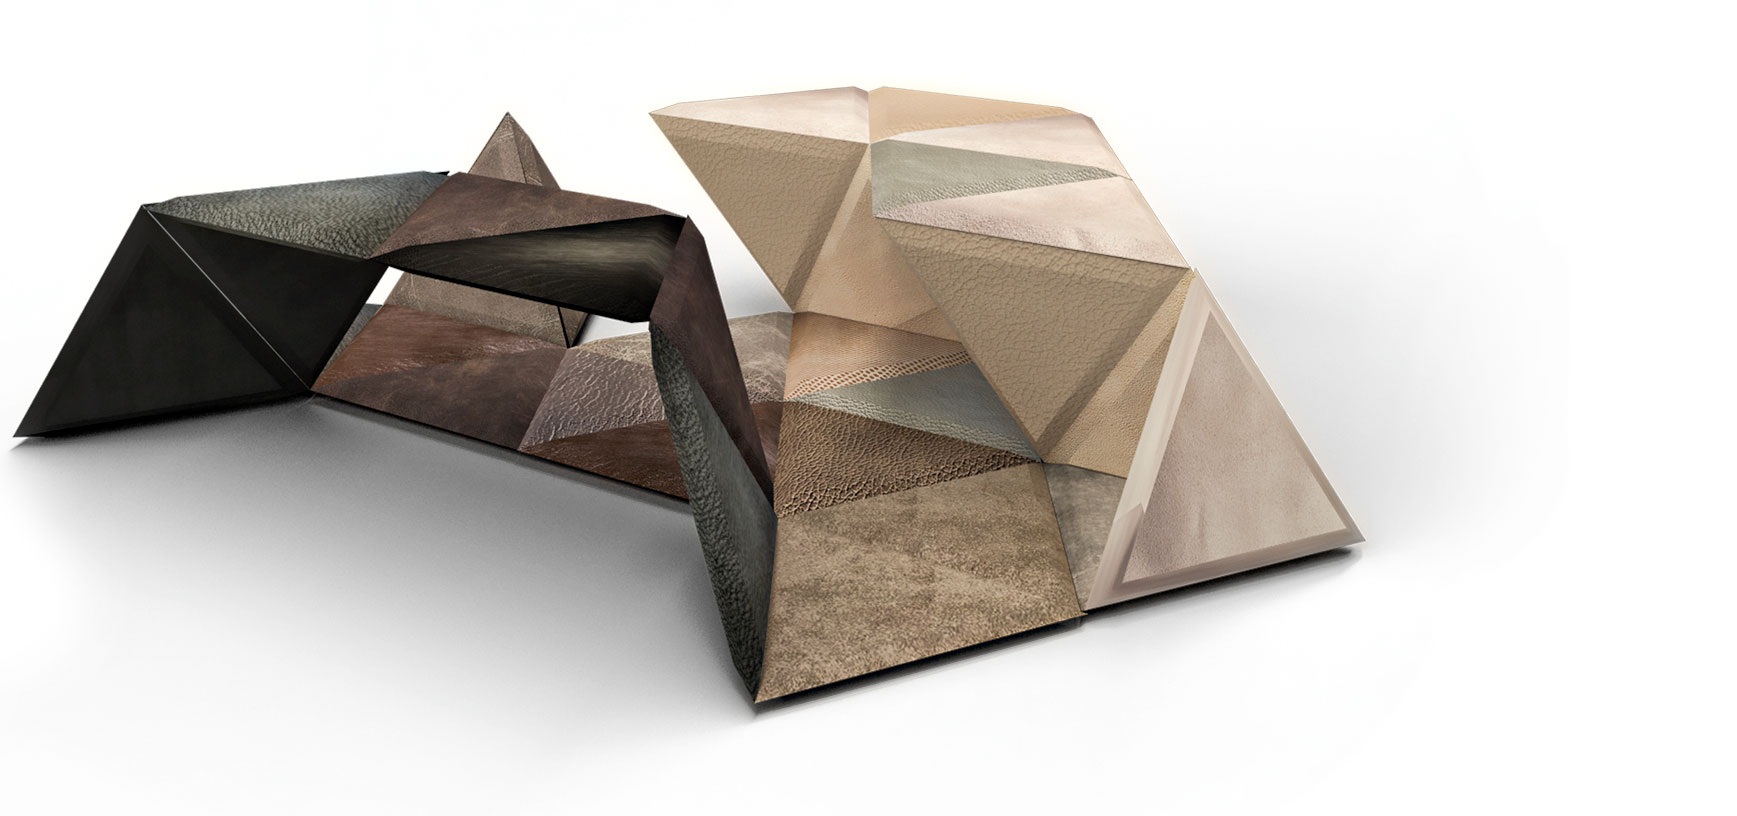 view of 'Equilaterre' morphing triangular leather rug